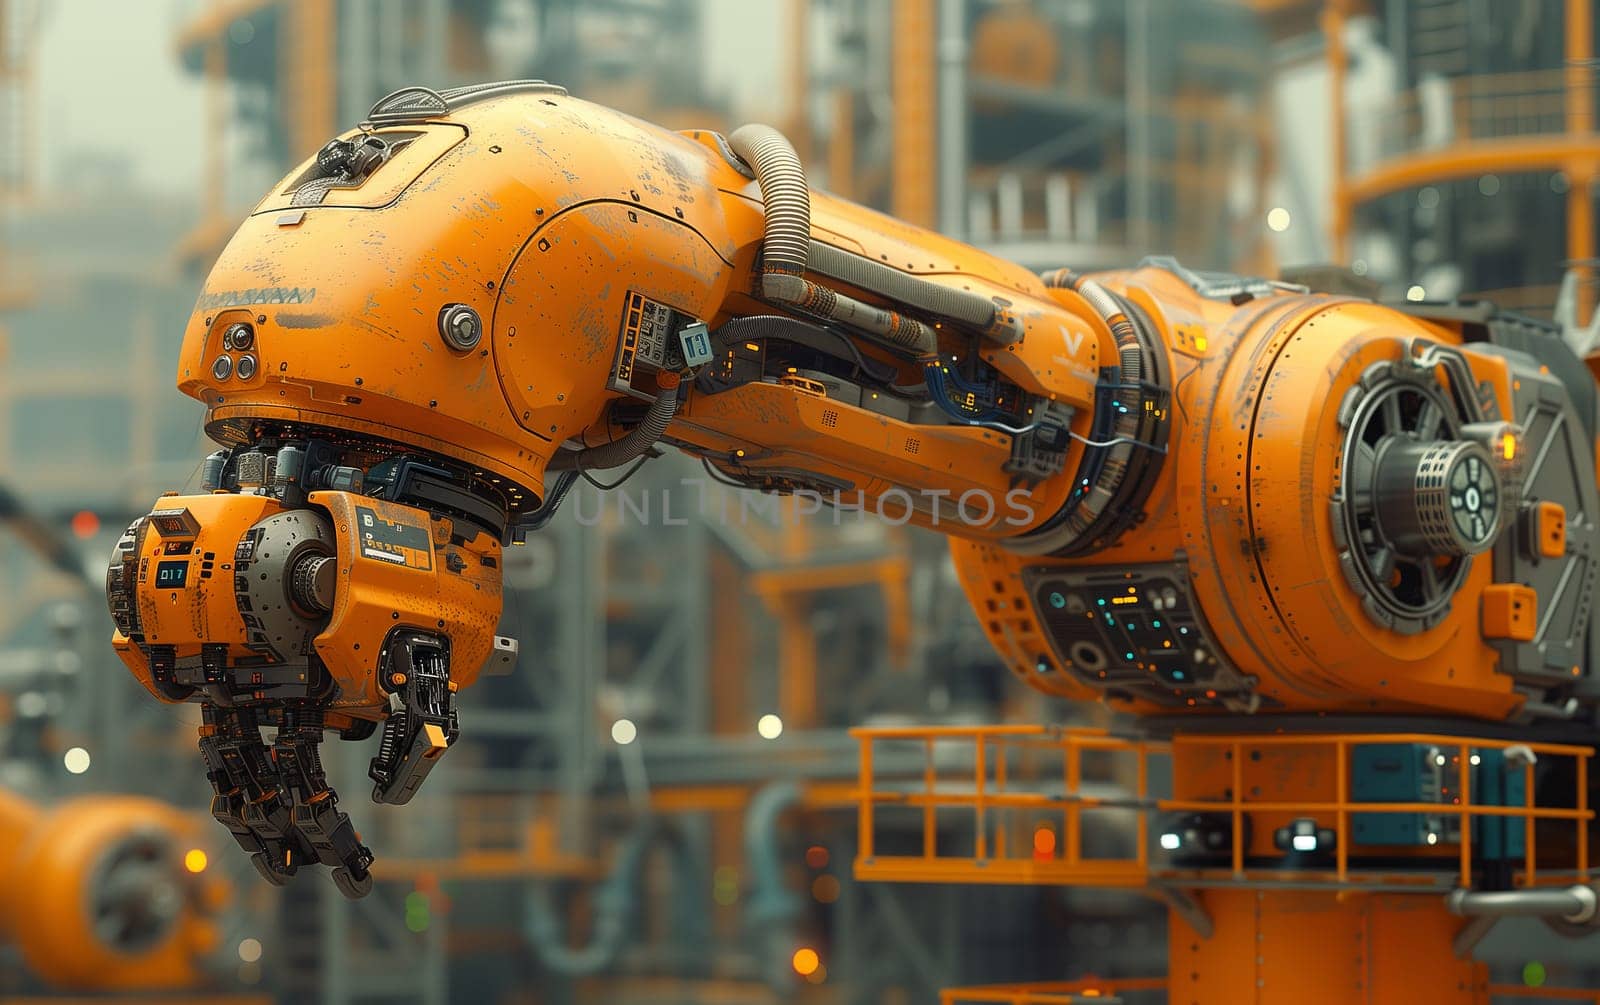 A robotic arm is used in an Engineering factory to handle Metal and Auto parts by richwolf